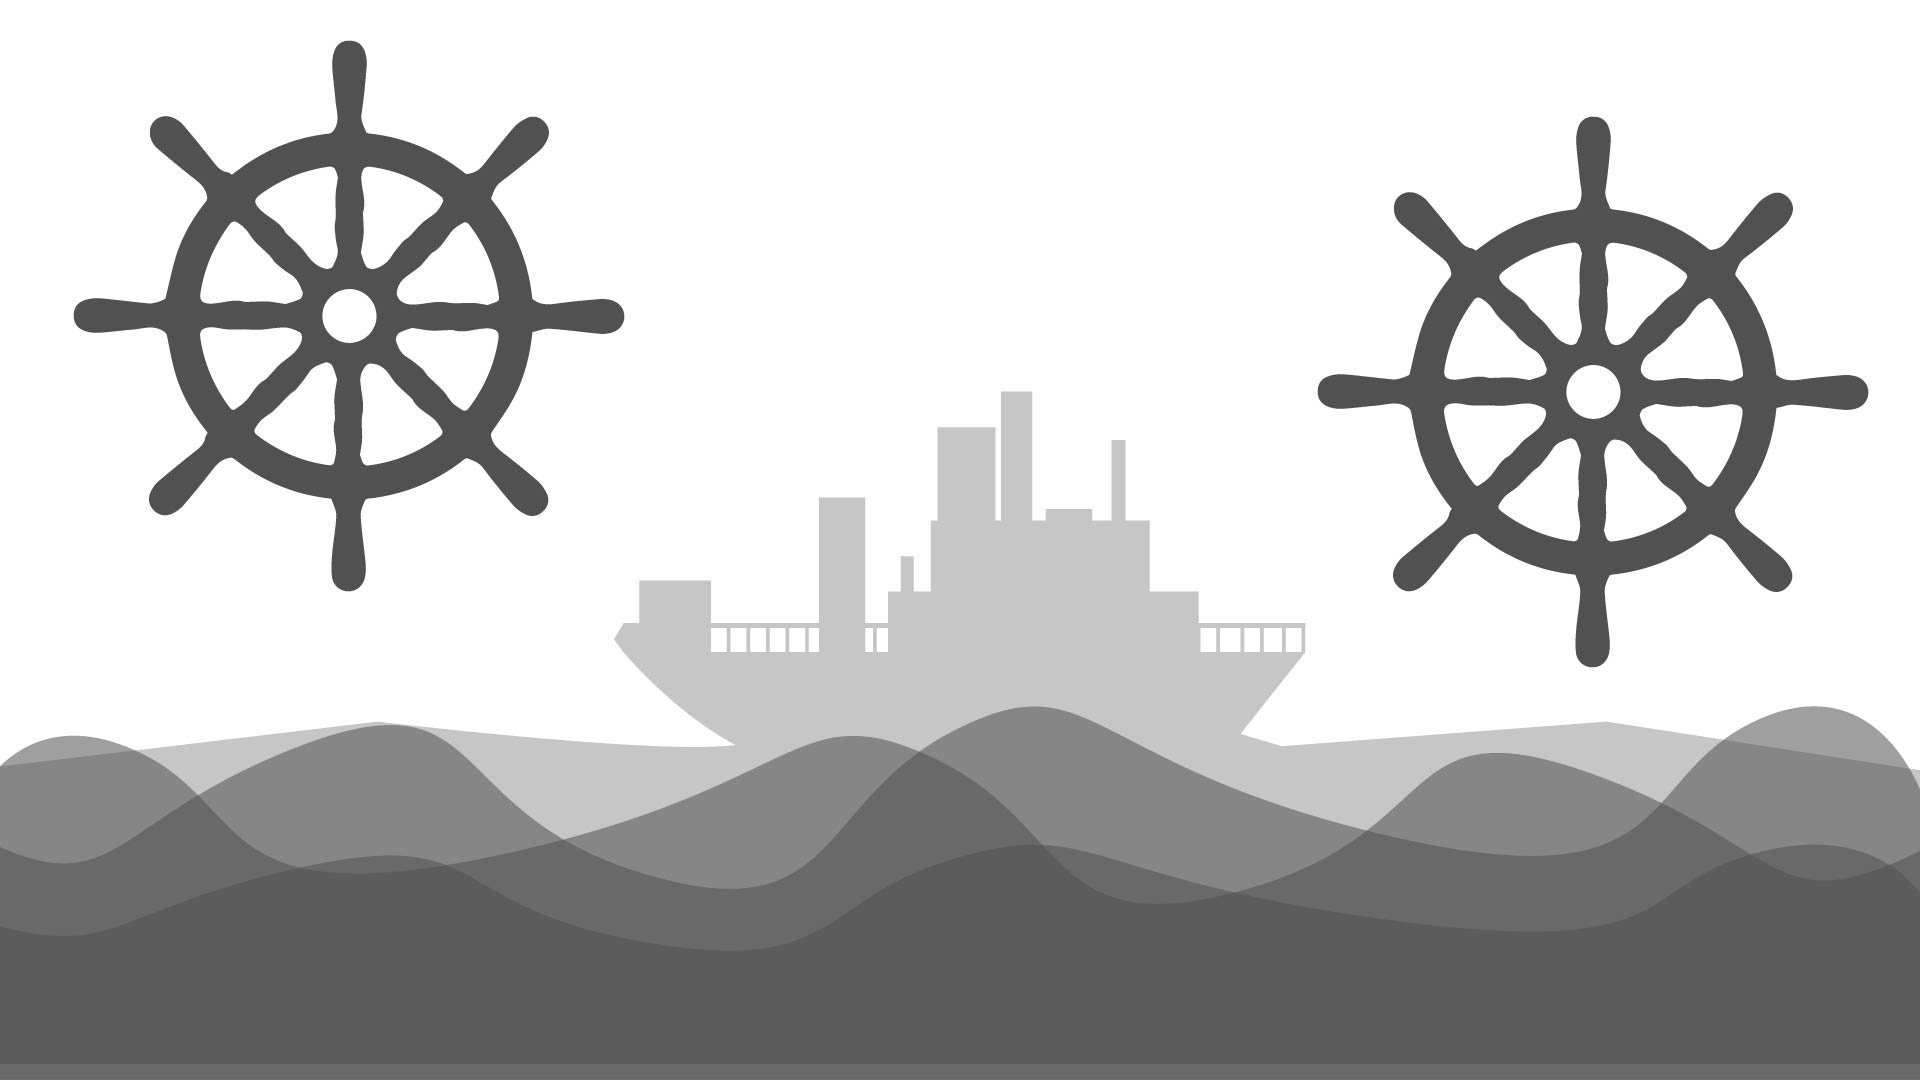 National Maritime Day Drawing Background in PDF, Illustrator, PSD, EPS, SVG, JPG, PNG